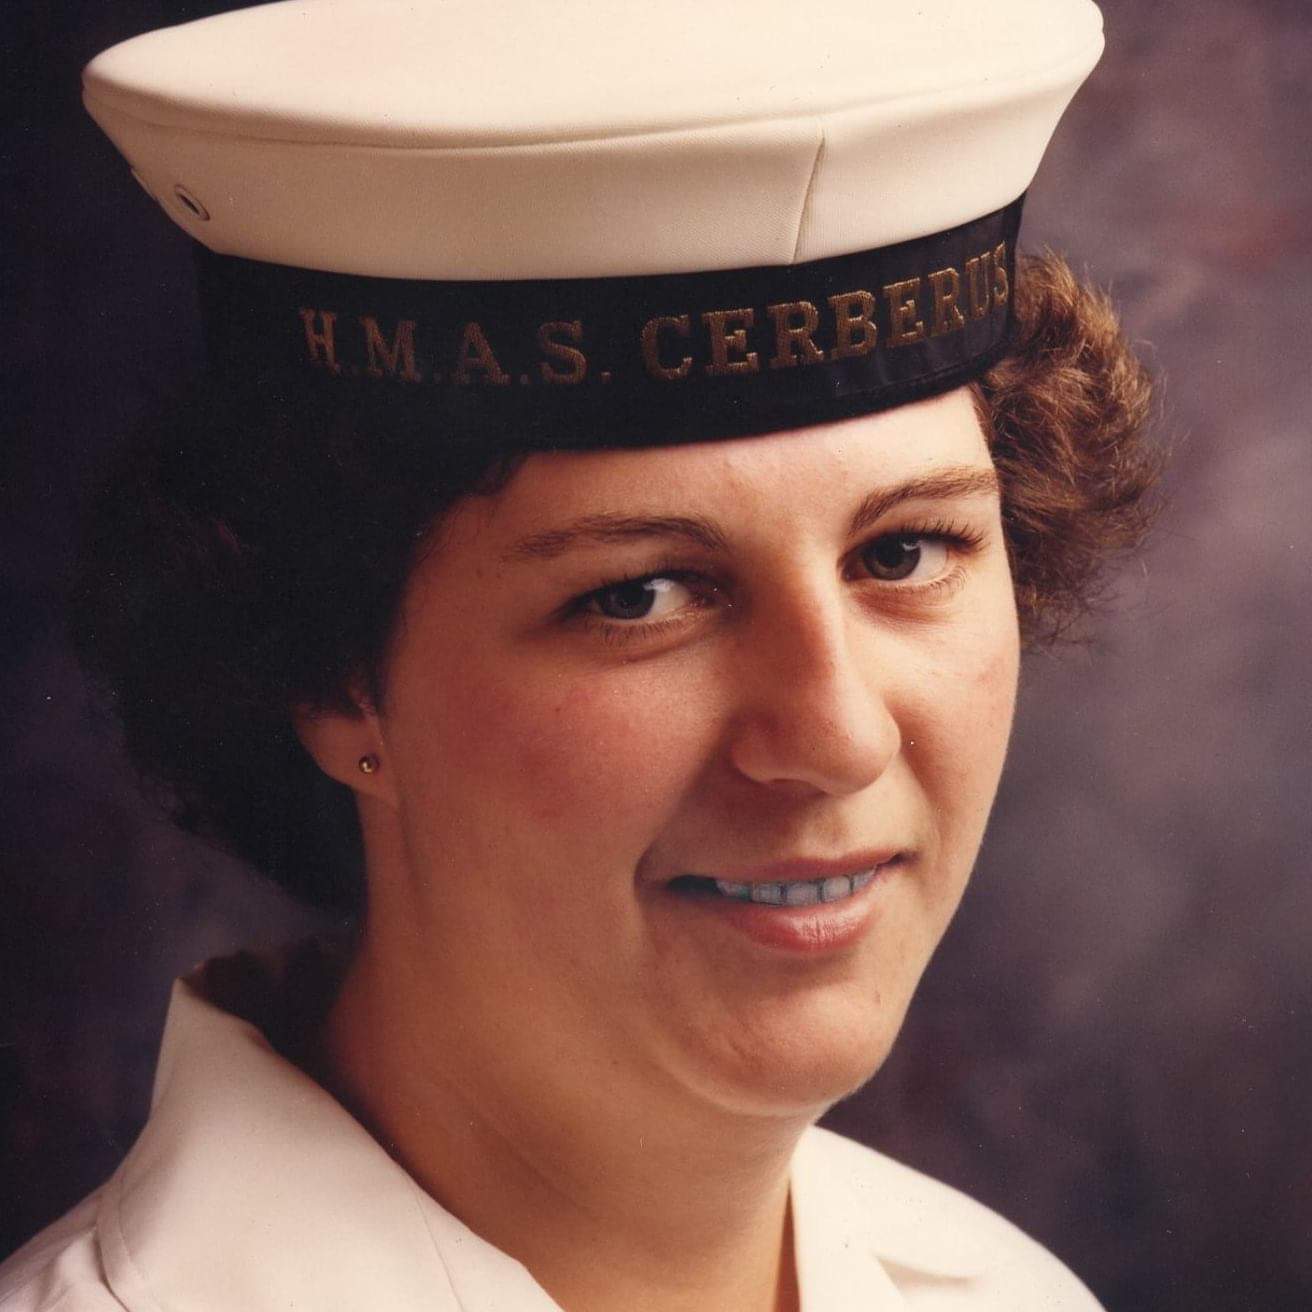 A younger Cheryl in her Navy uniform.